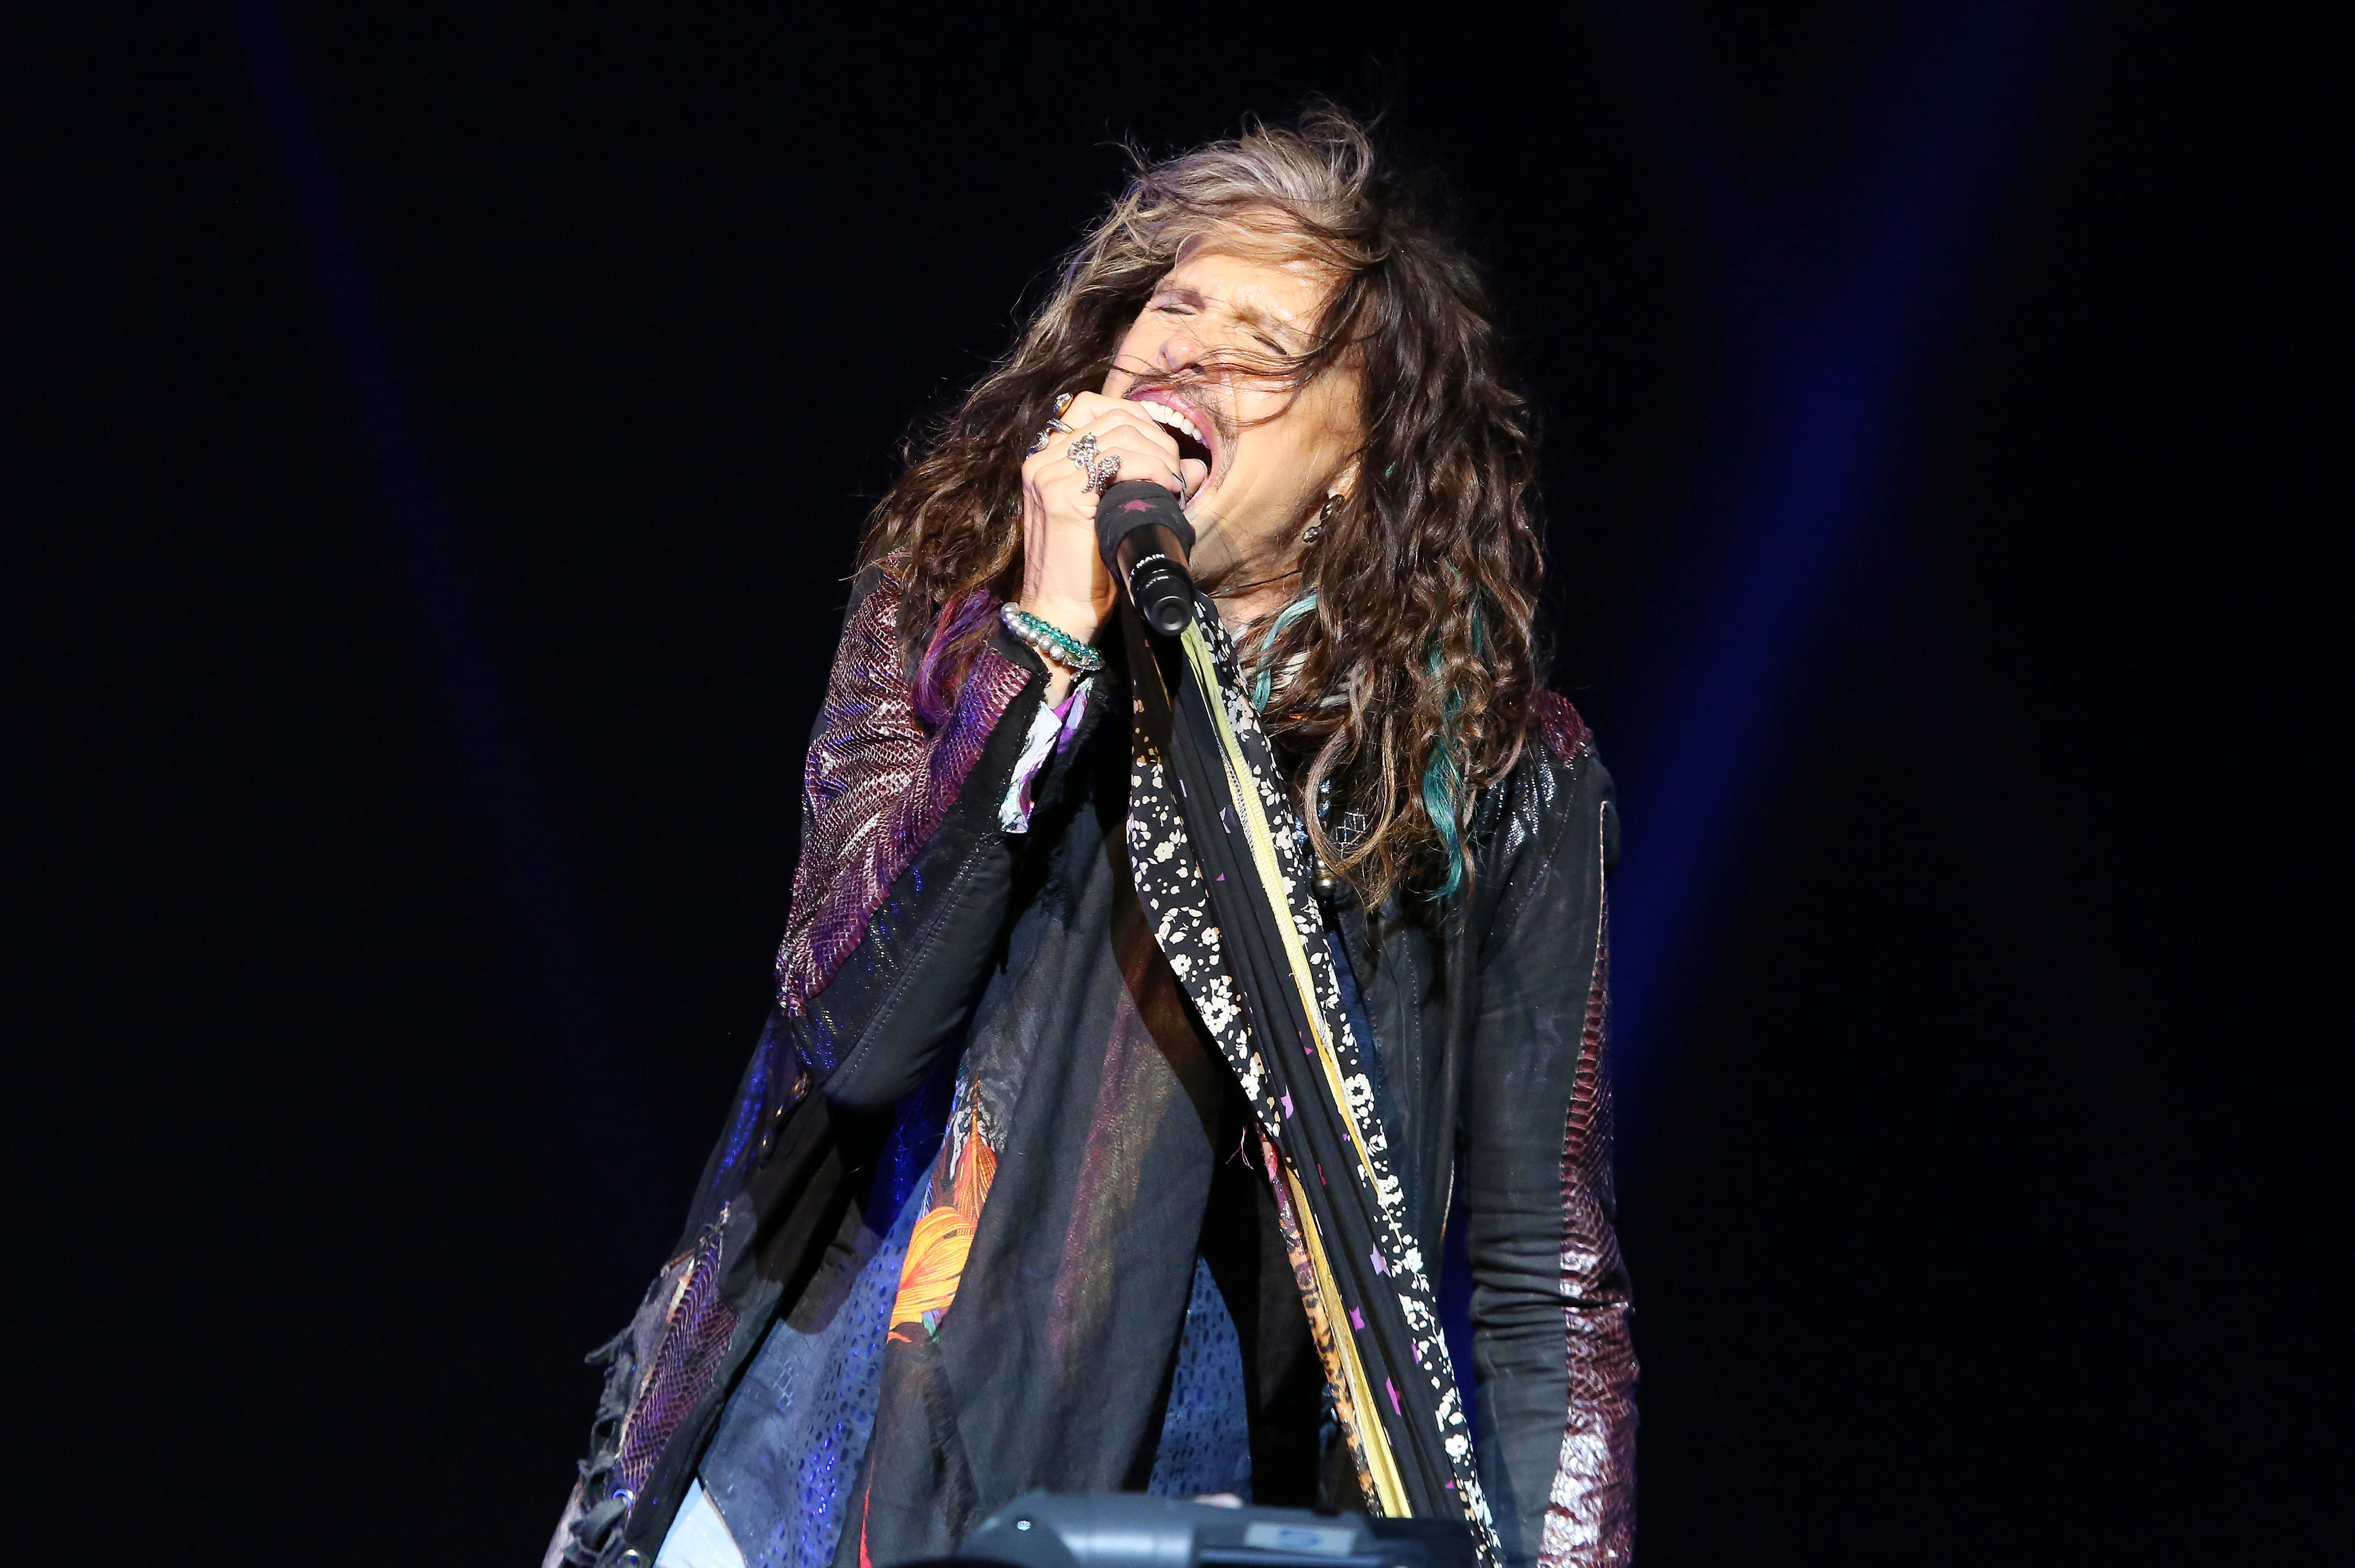 Steven Tyler reunites with his brood and more star snaps of the